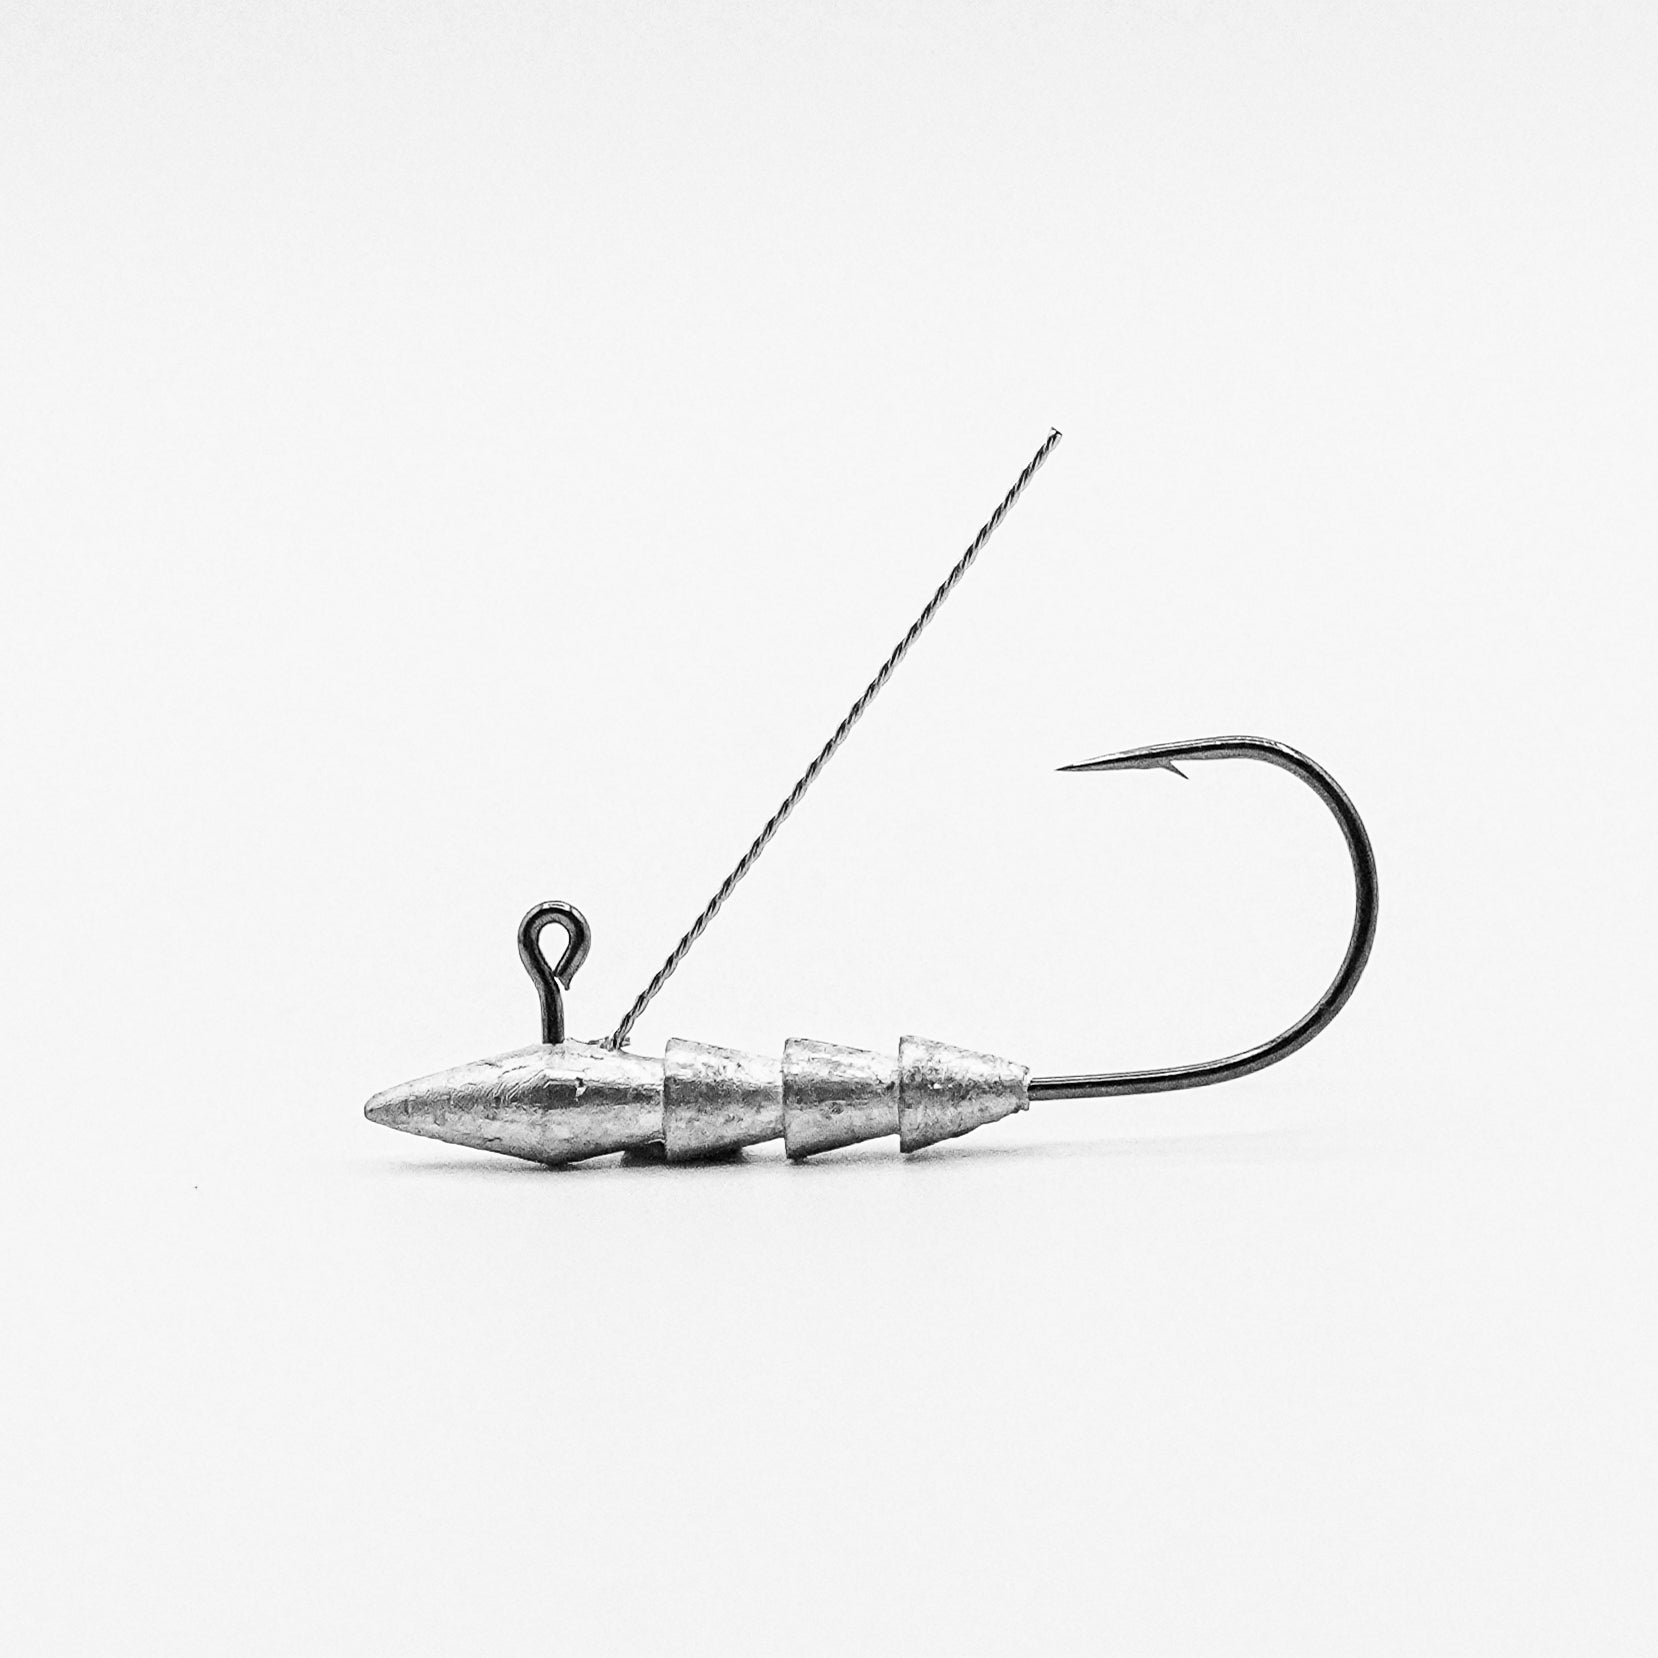 Assist hook 11-#1/0 #2/0 #3/0 #4/0 #5/0 – Jigs Fishing Tackle Store